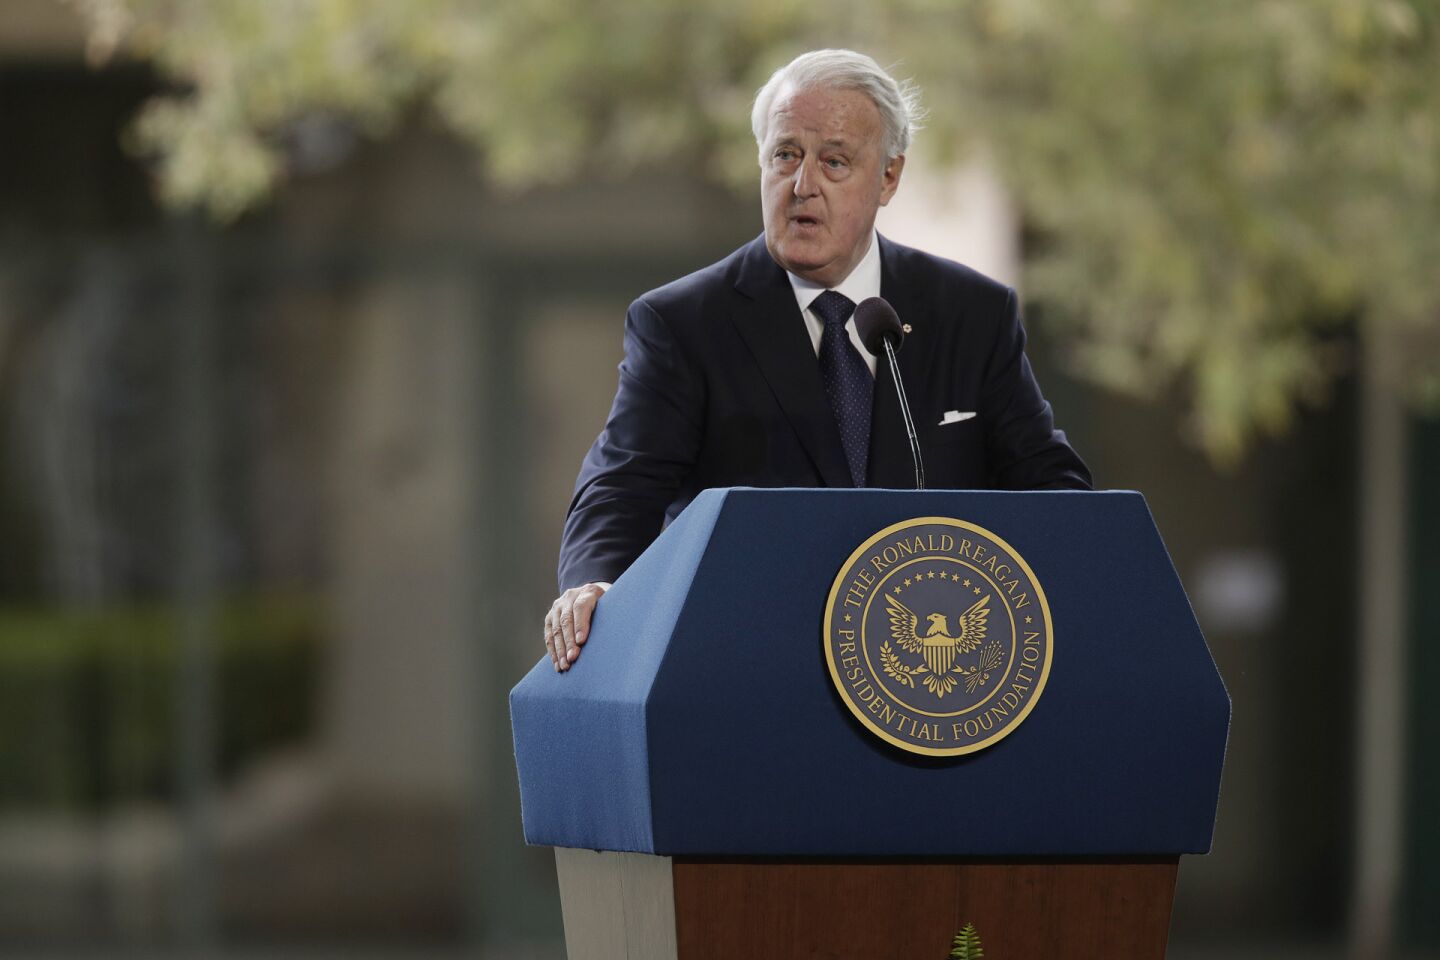 Former Canadian Prime Minister Brian Mulroney reads a letter from Ronald Reagan to Nancy Reagan during the funeral service for former First Lady Nancy Reagan.